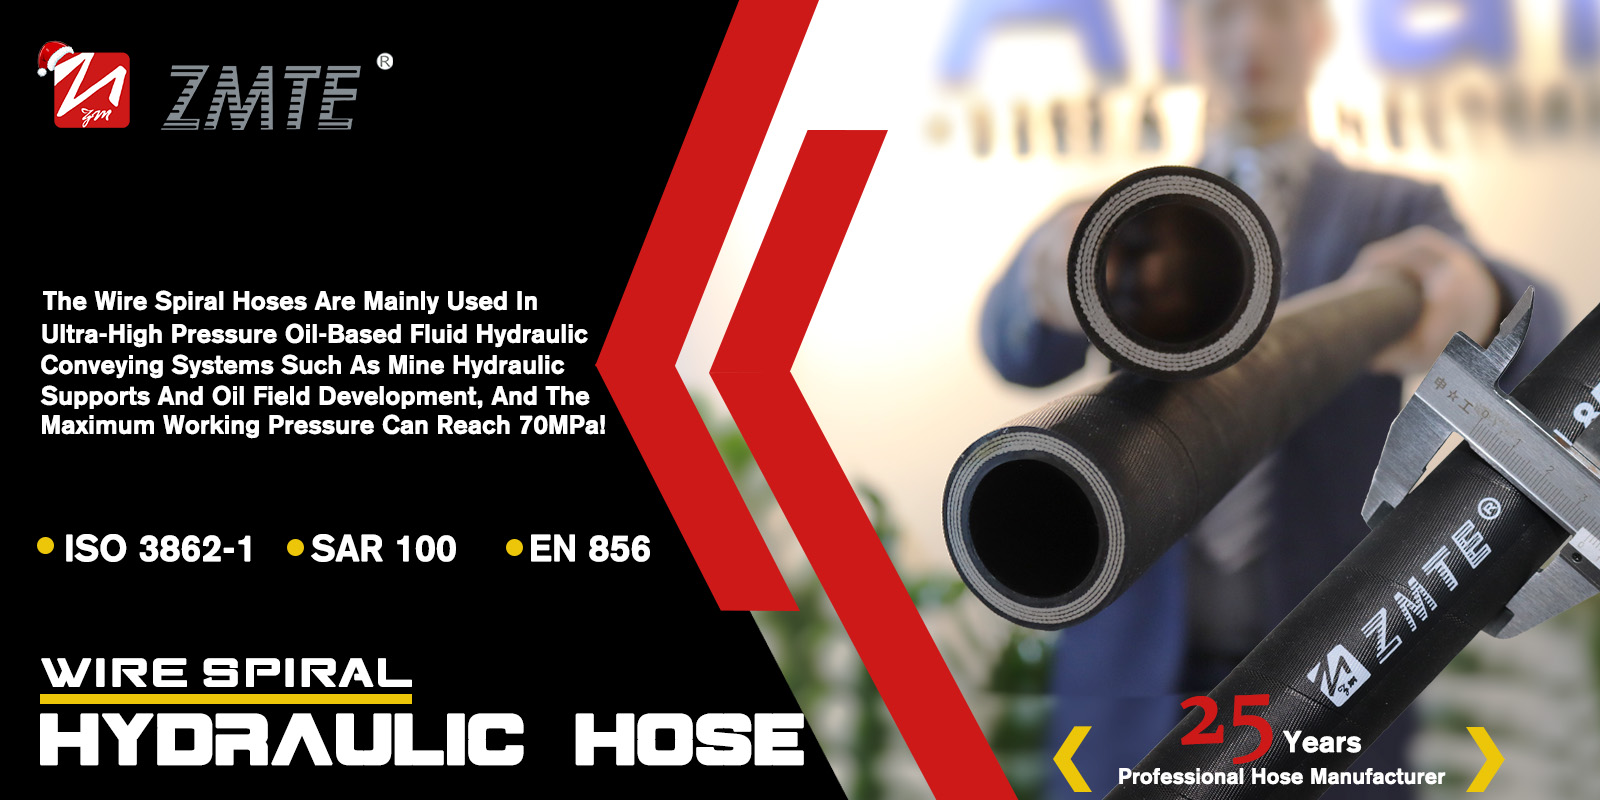 Information related to the 4SP hydraulic hose.